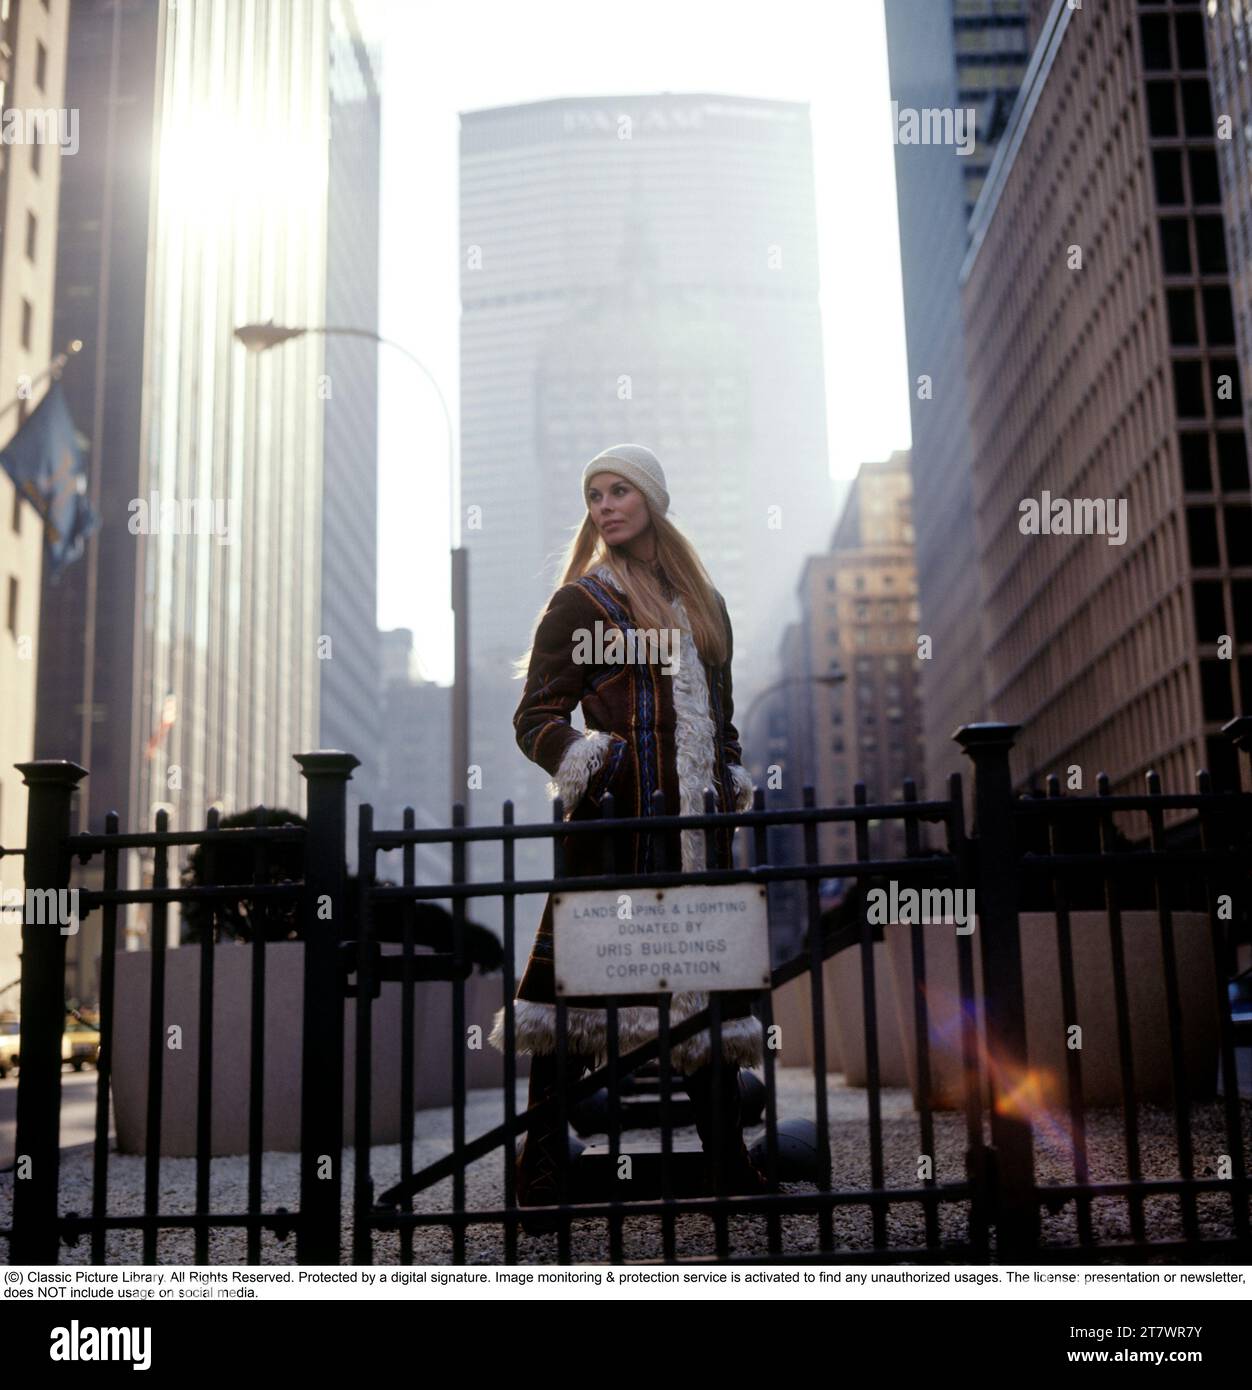 1970s lifestyle and fashion. A young woman wearing a typical 1970s coat in this photo taken on Manhattan New York with the Pan Am building in the background. Her name is Marita Lindholm, fashion model. 1971 Stock Photo